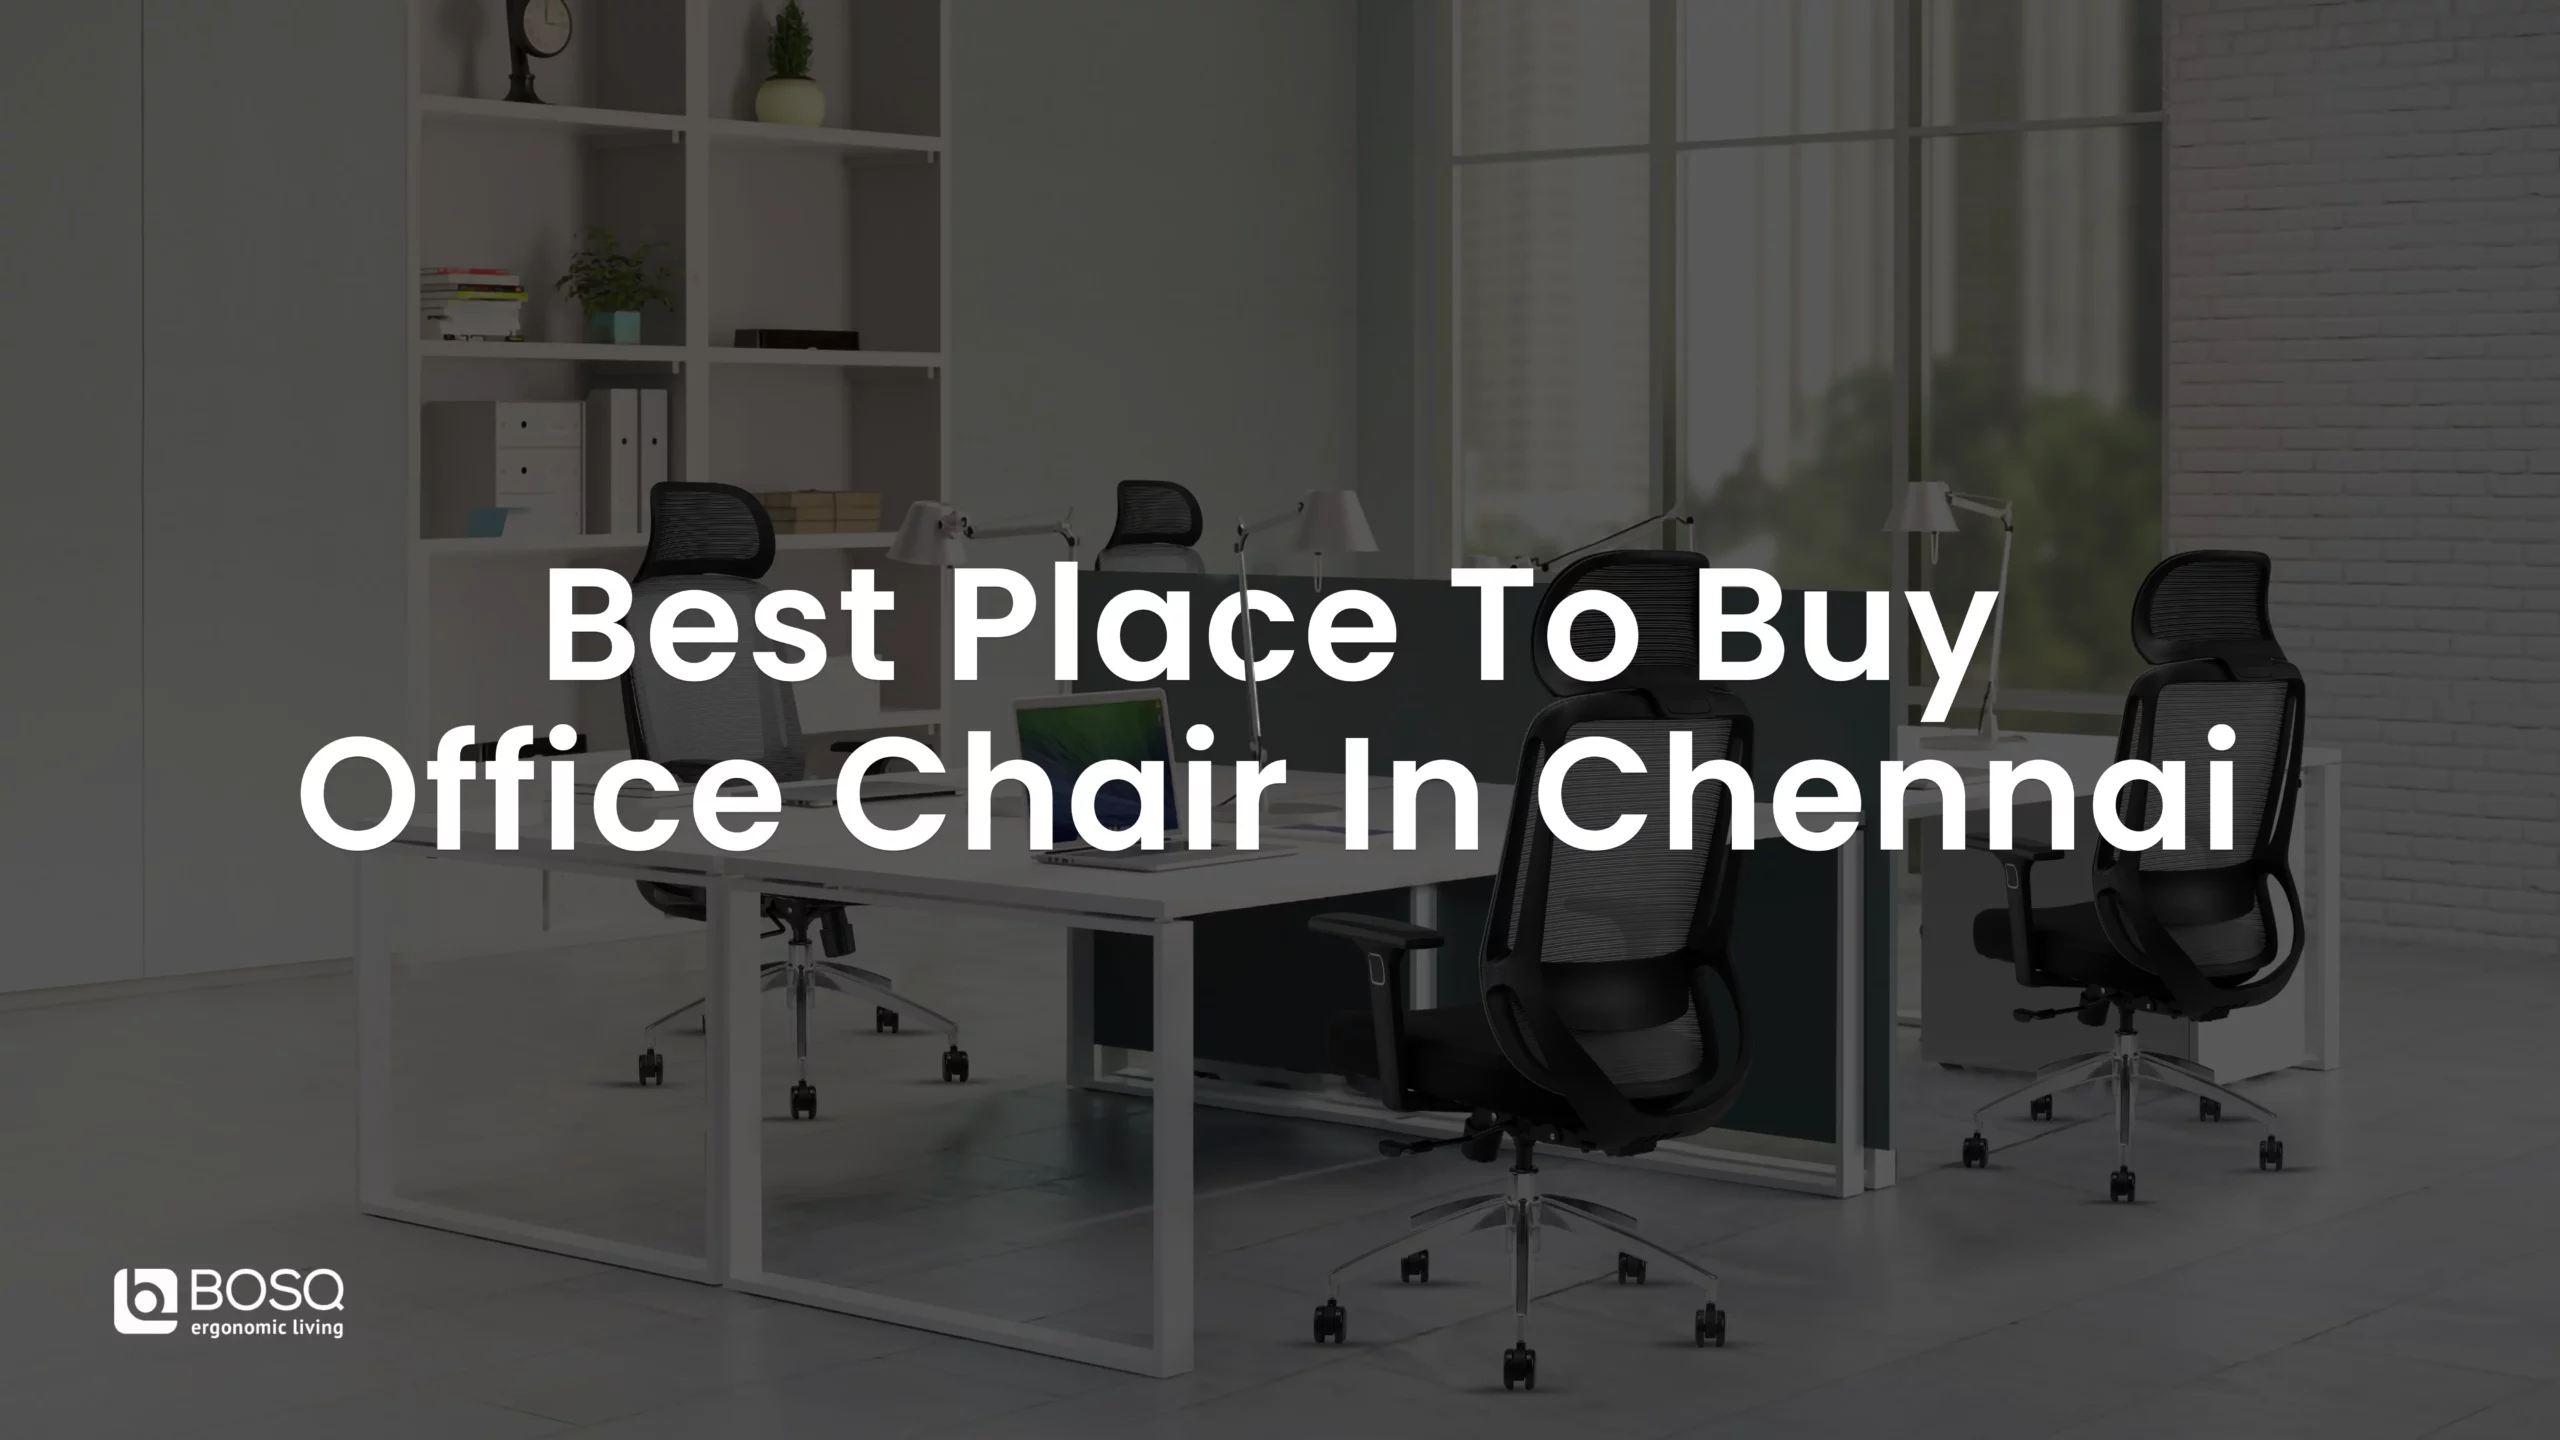 Office chairs in chennai